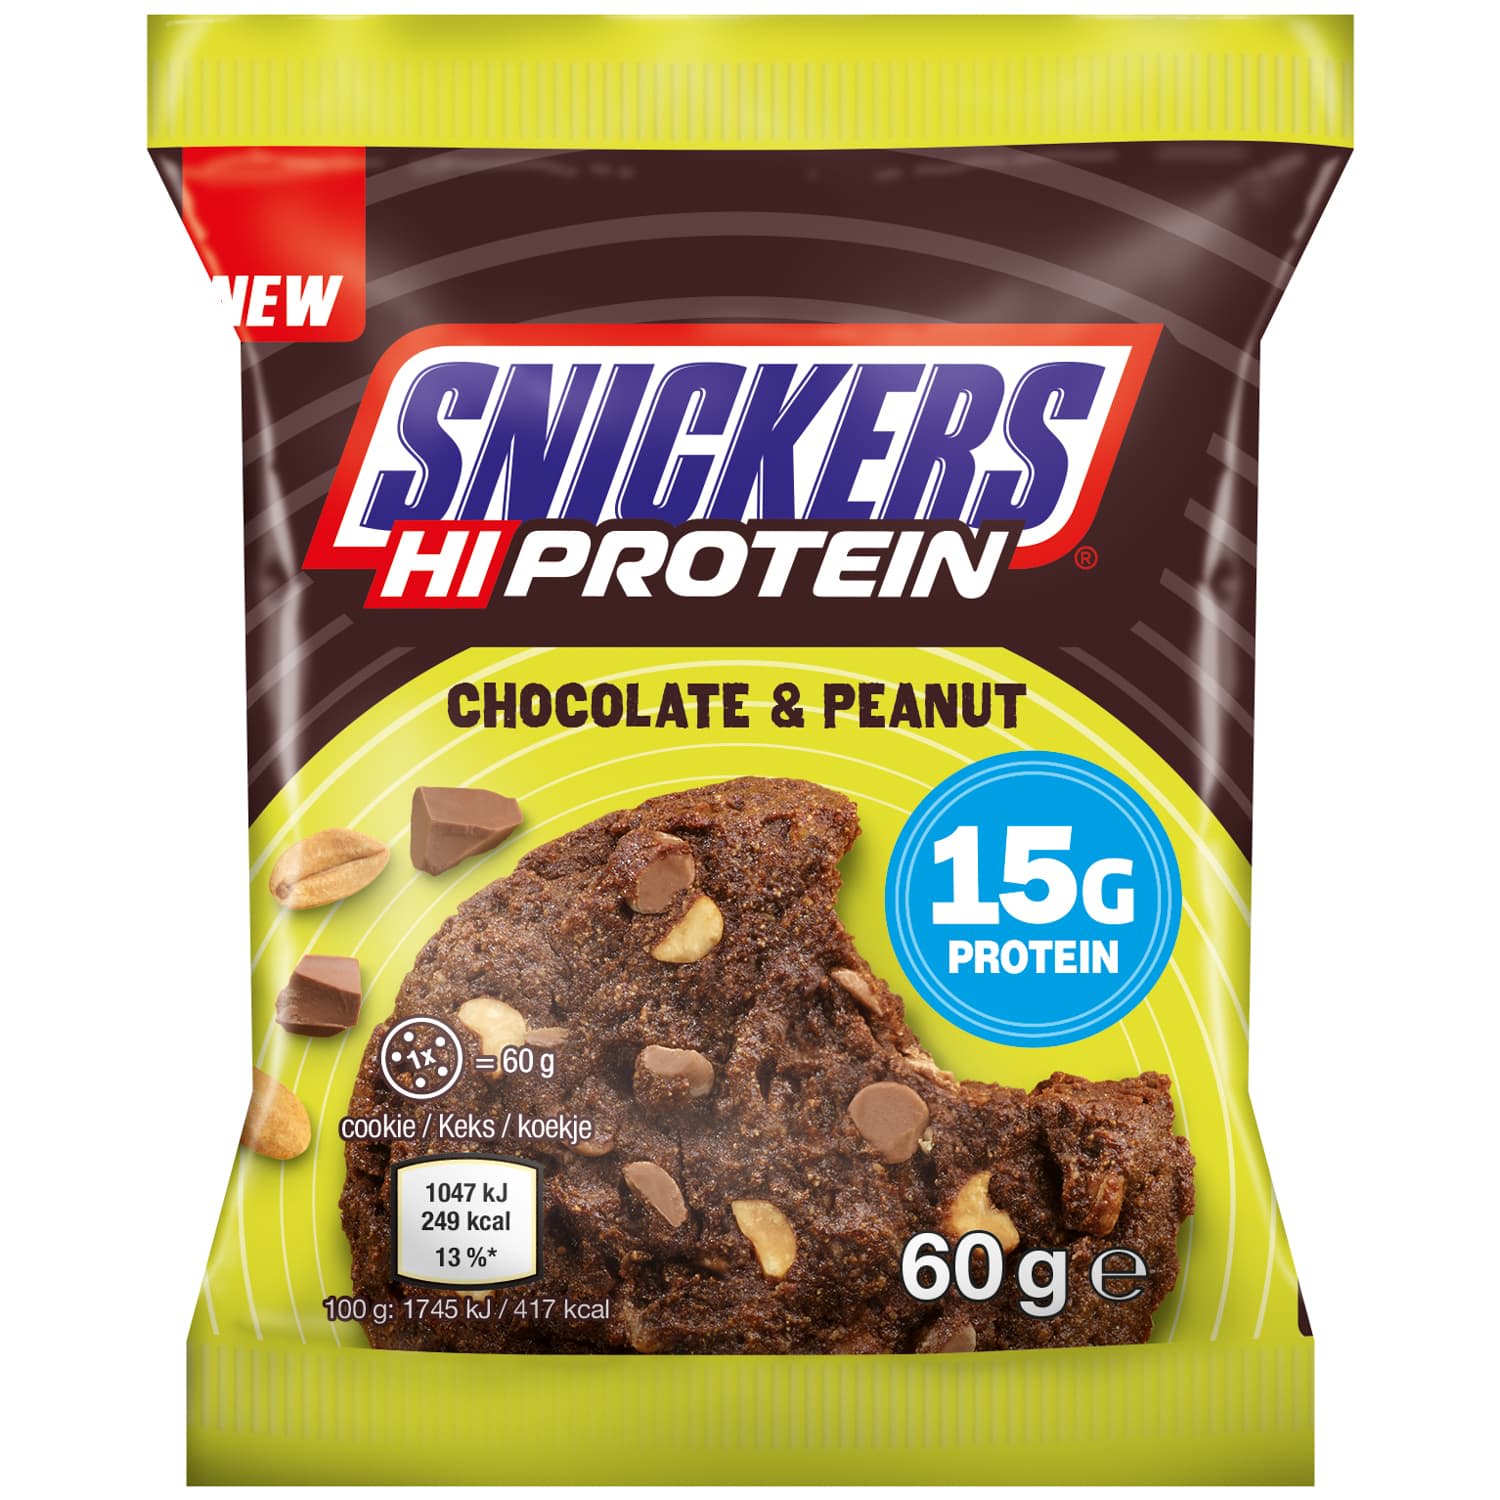 Snickers Hi-Protein Chocolate Peanut Cookie 60g - theskinnyfoodco